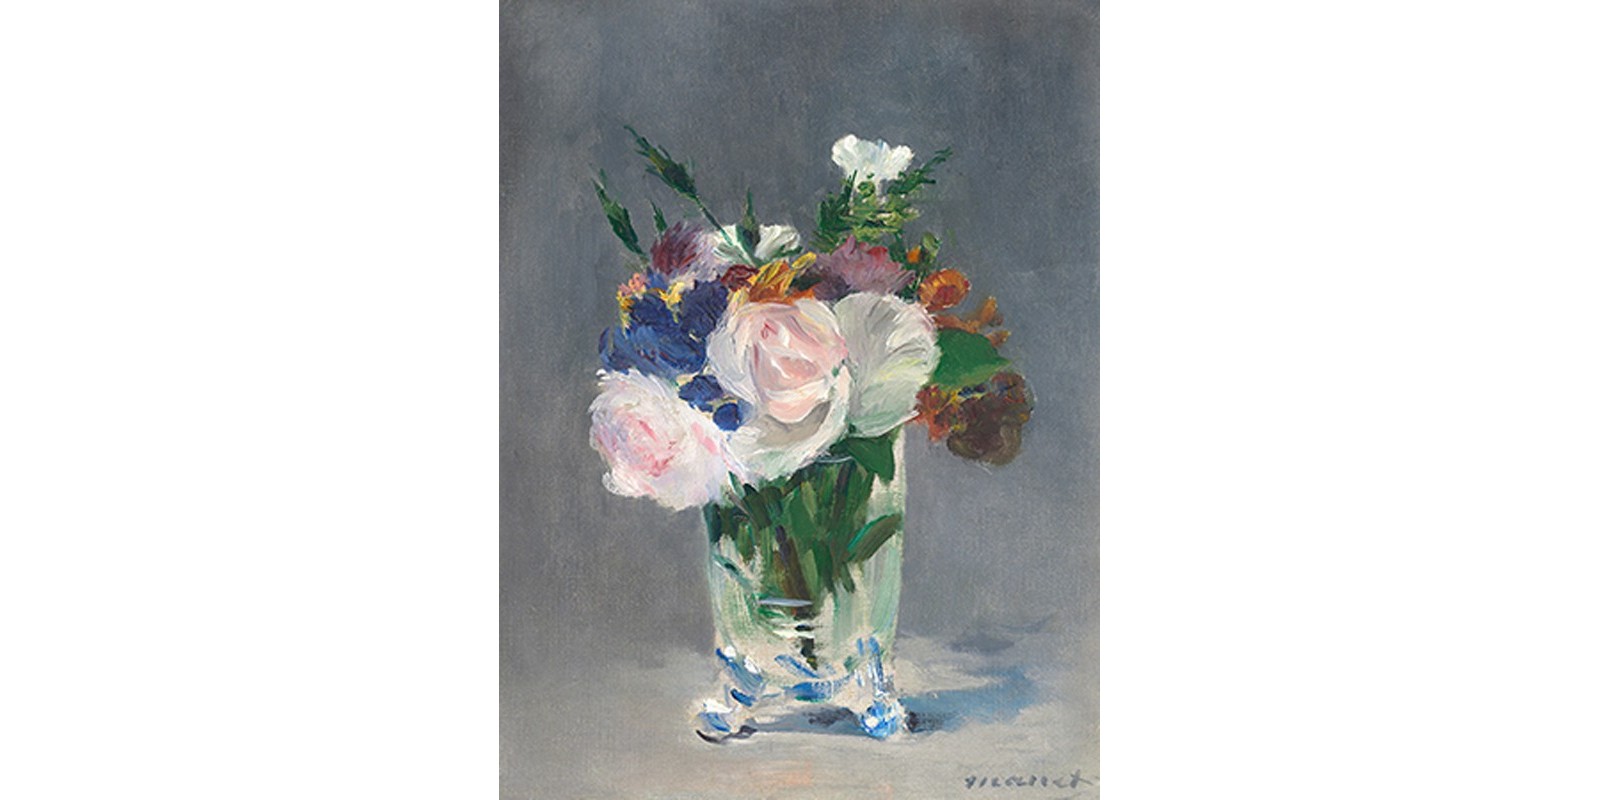 Edouard Manet - Flowers in a Crystal Vase